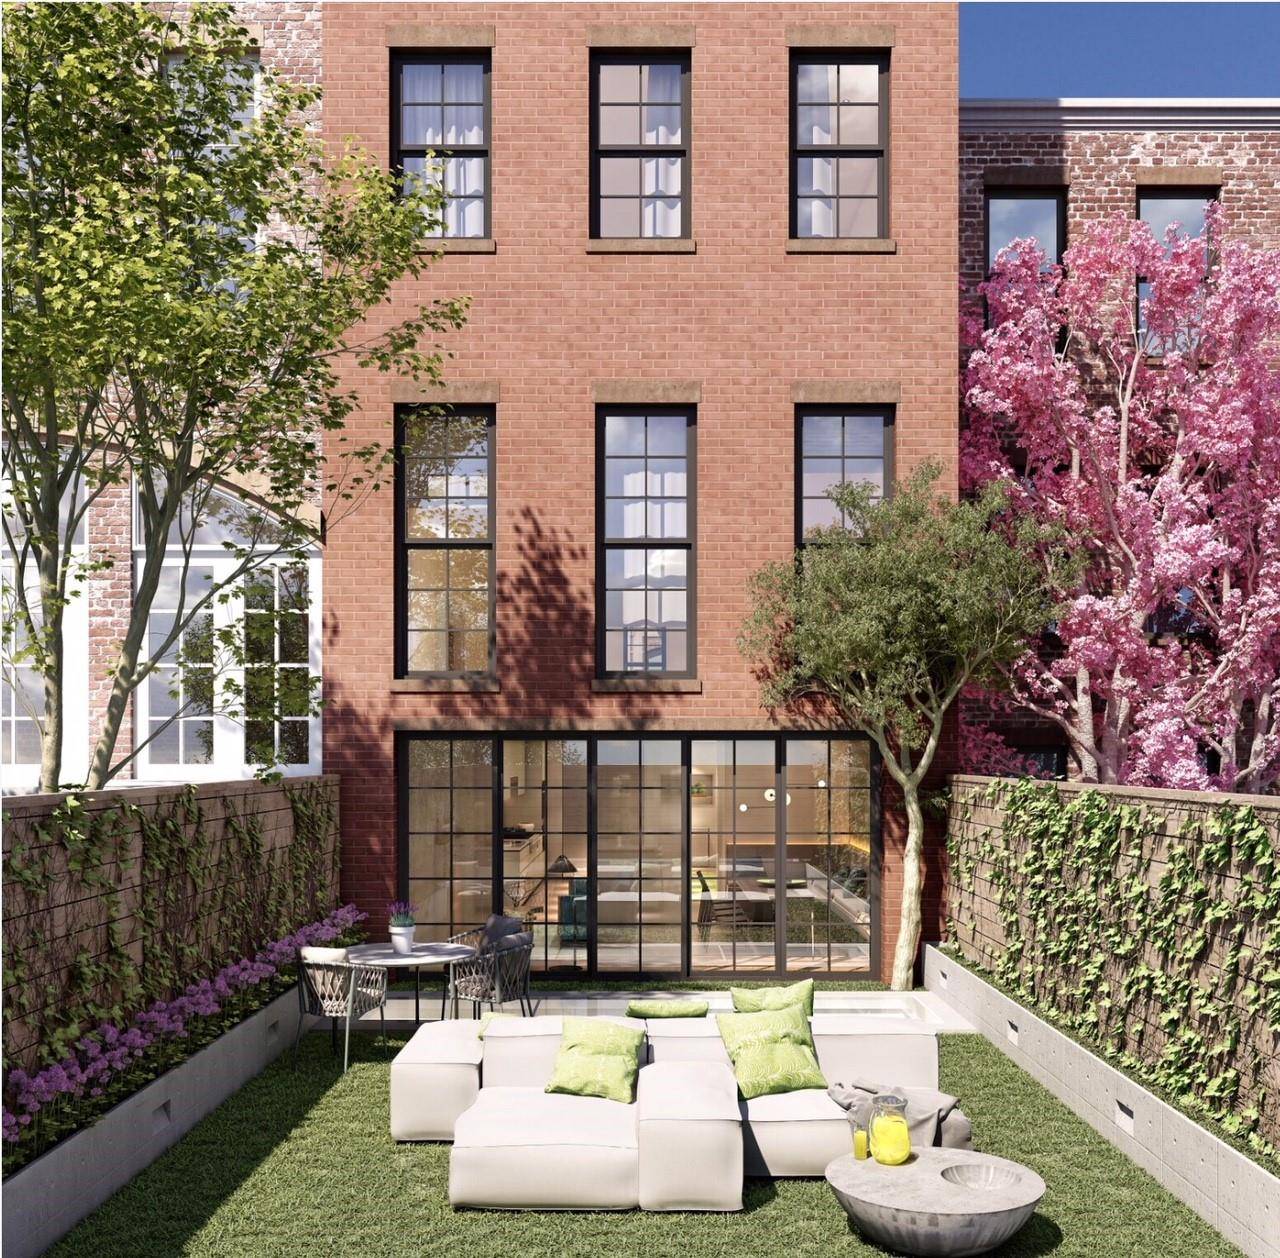 BEAUTIFUL WEST VILLAGE TOWNHOUSE WITH FULLY APPROVED LPC DOB APPROVED PLANS, EXPANDABLE TO 7500 SF 54 Charles Street is a 20' wide Greek Revival Townhouse on one of the finest ...